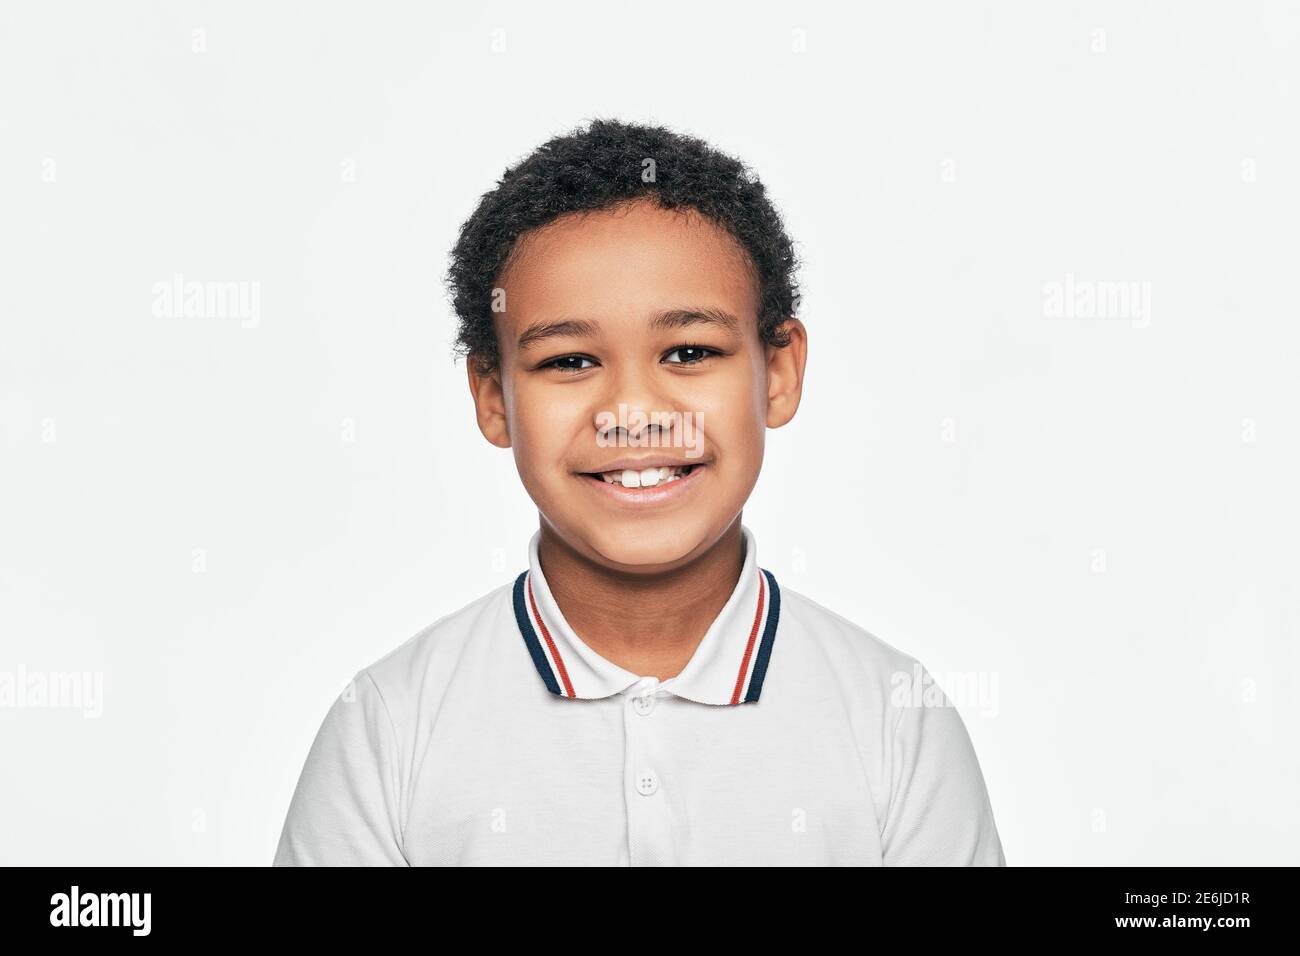 Portrait of a handsome African American boy with toothy smile. Isolated on white background Stock Photo